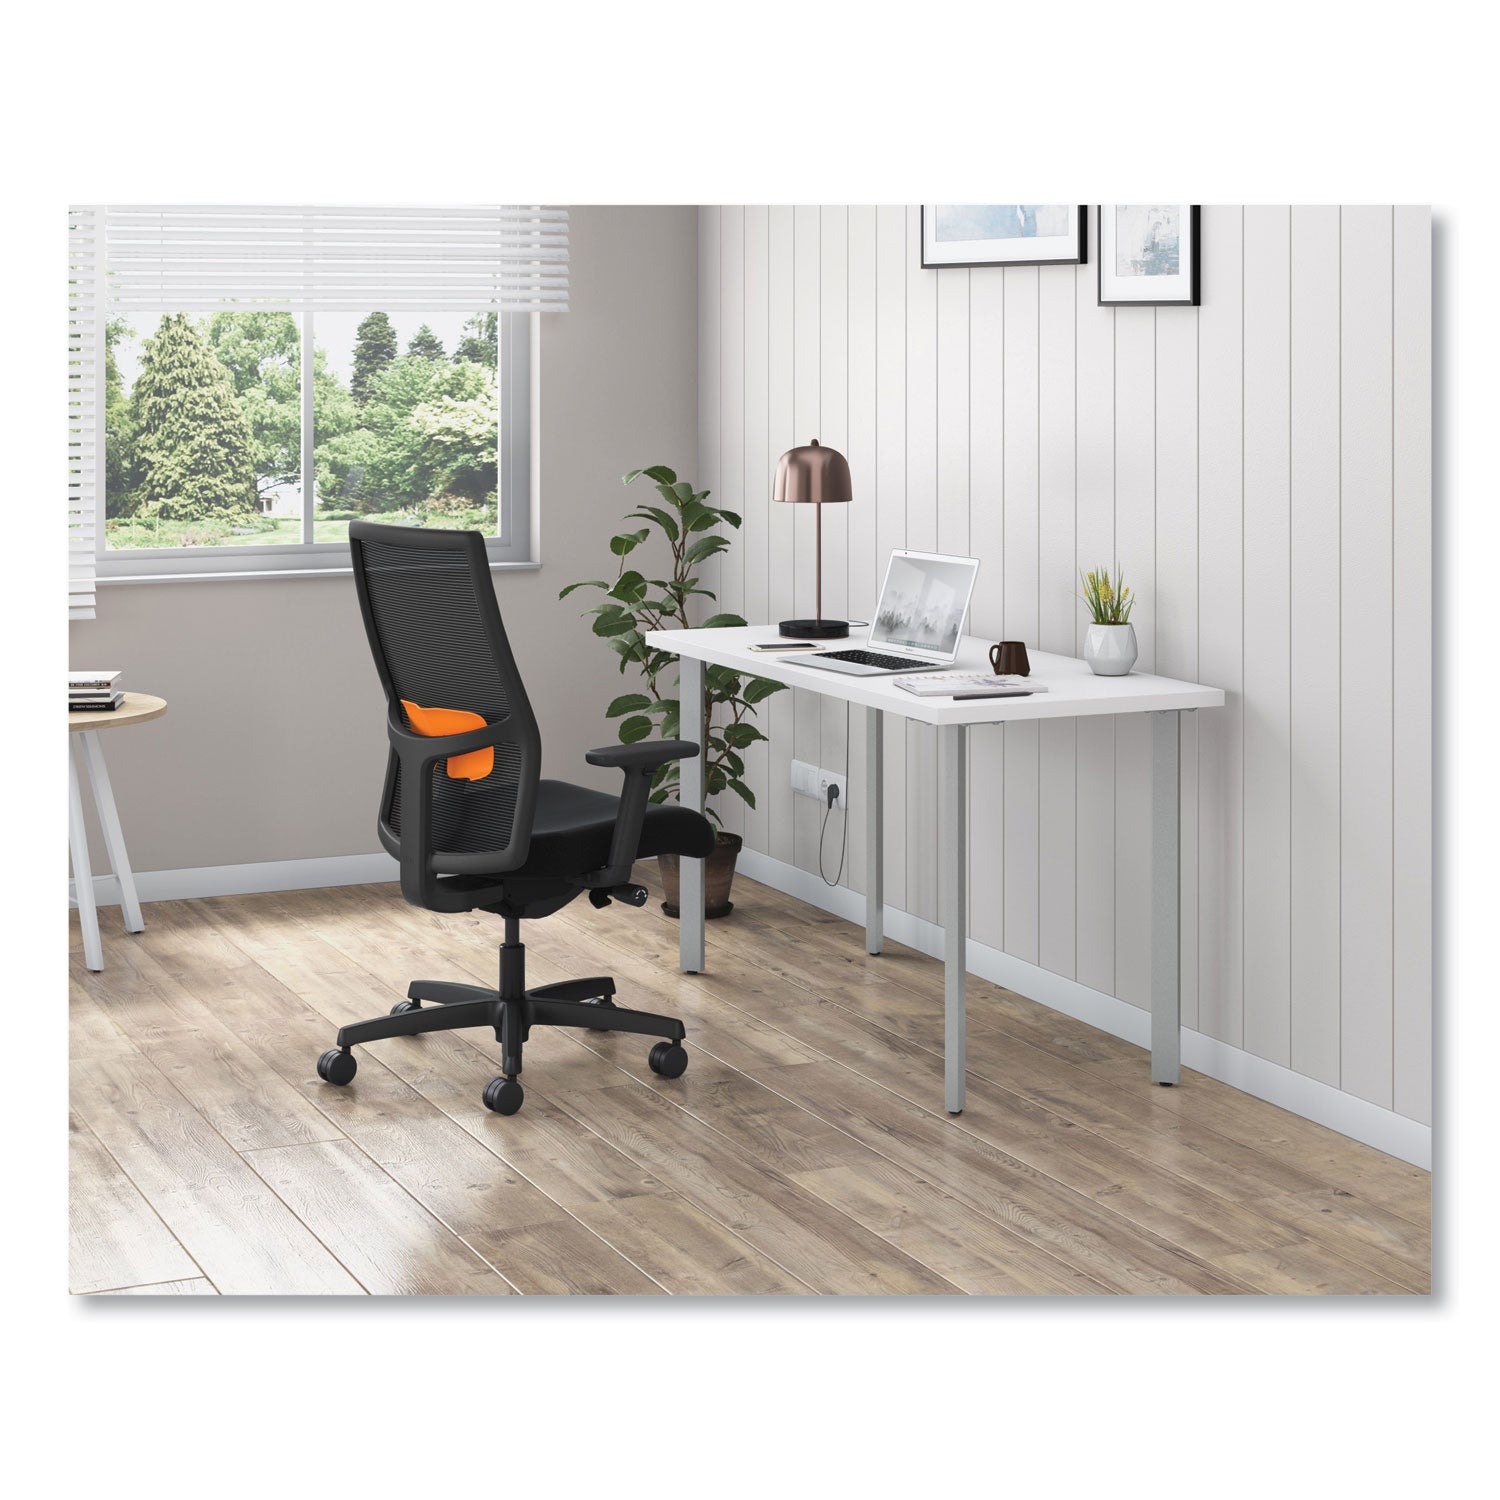 ignition-20-4-way-stretch-mid-back-mesh-task-chair-orange-adjustable-lumbar-support-black-ships-in-7-10-business-days_honi2mm2amc10mt - 3